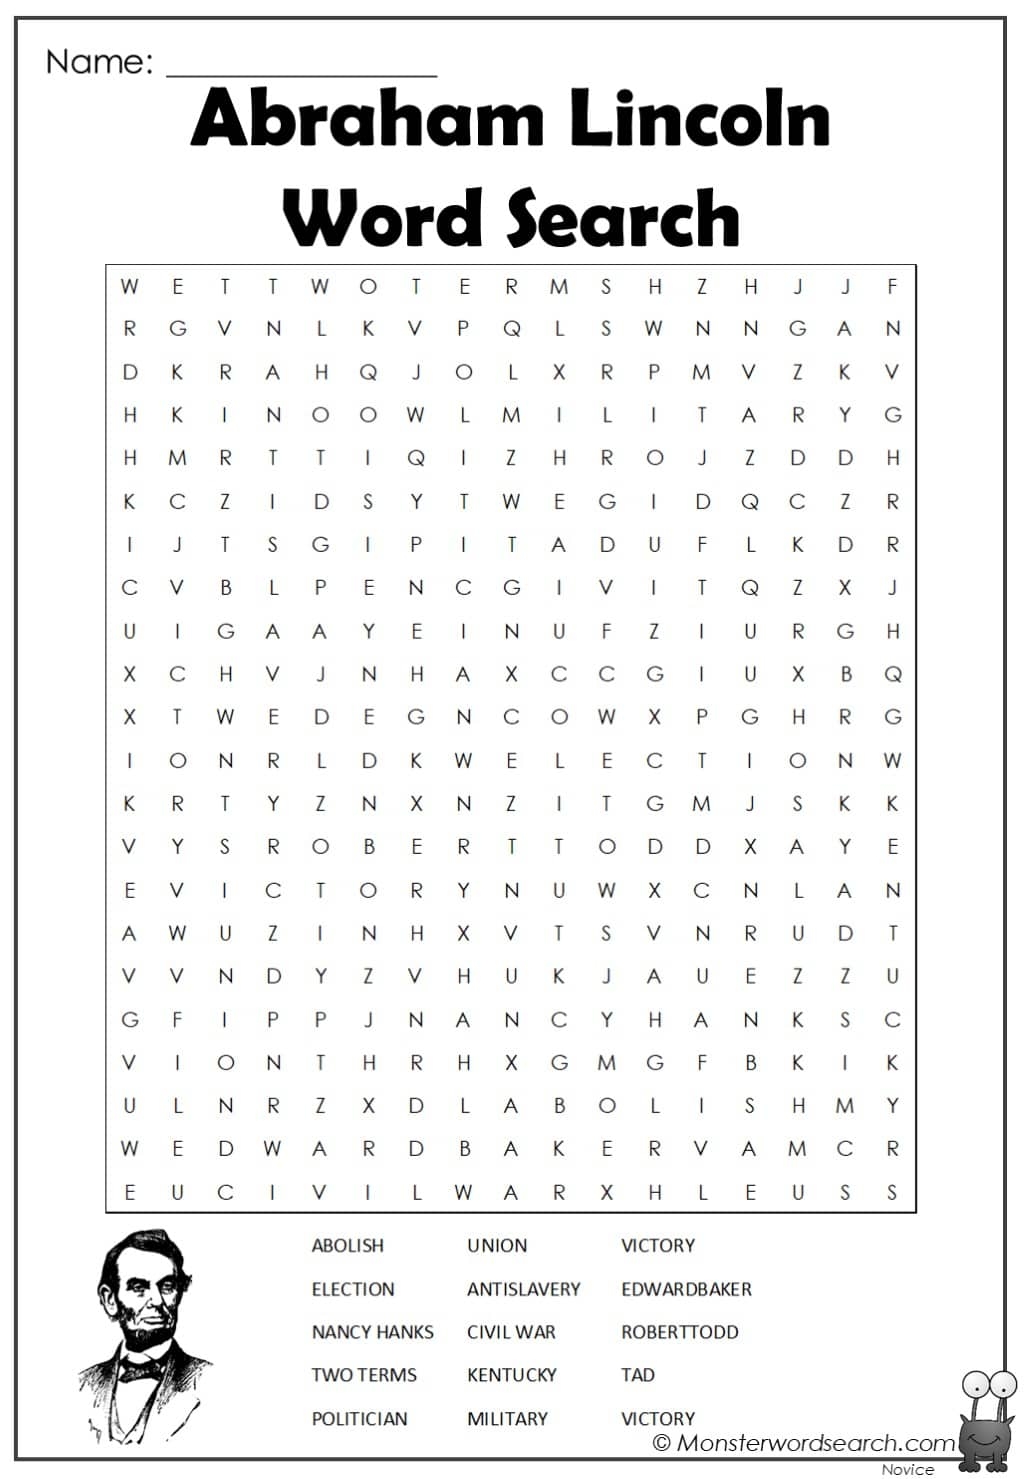 Abraham Lincoln Word Search Monster Word Search